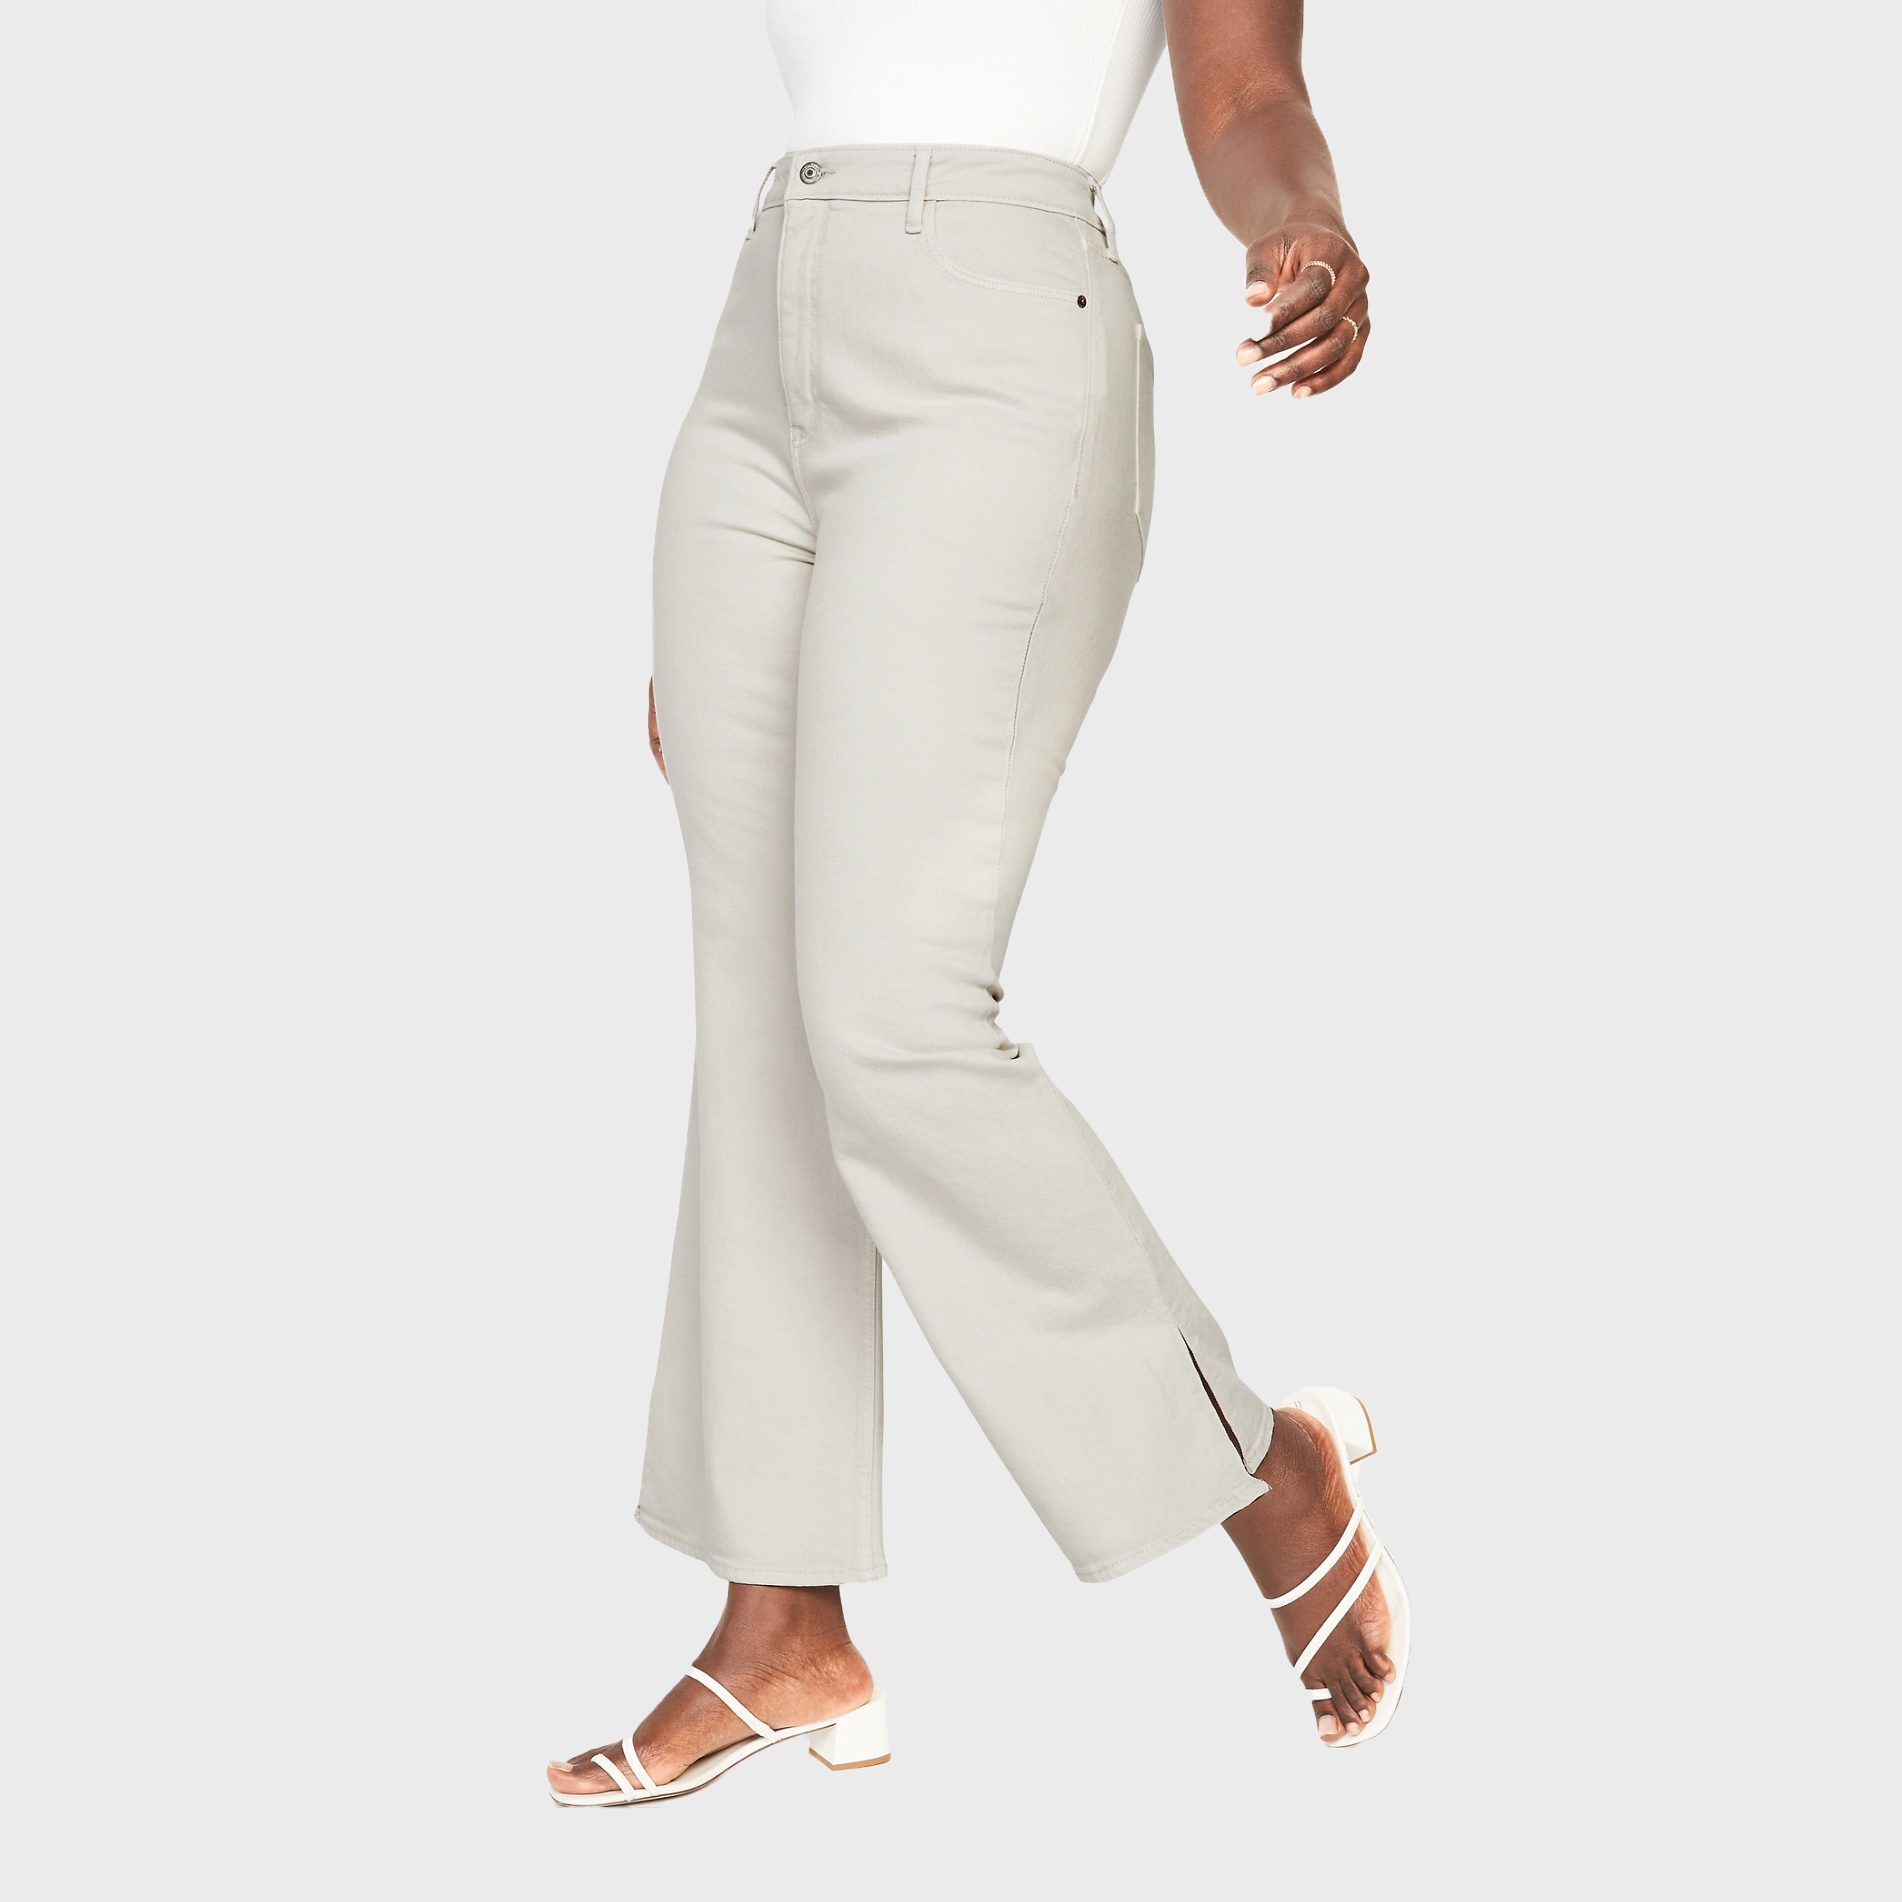 25 Best White Jeans for Women to Wear in 2022 | Stylish White Jeans